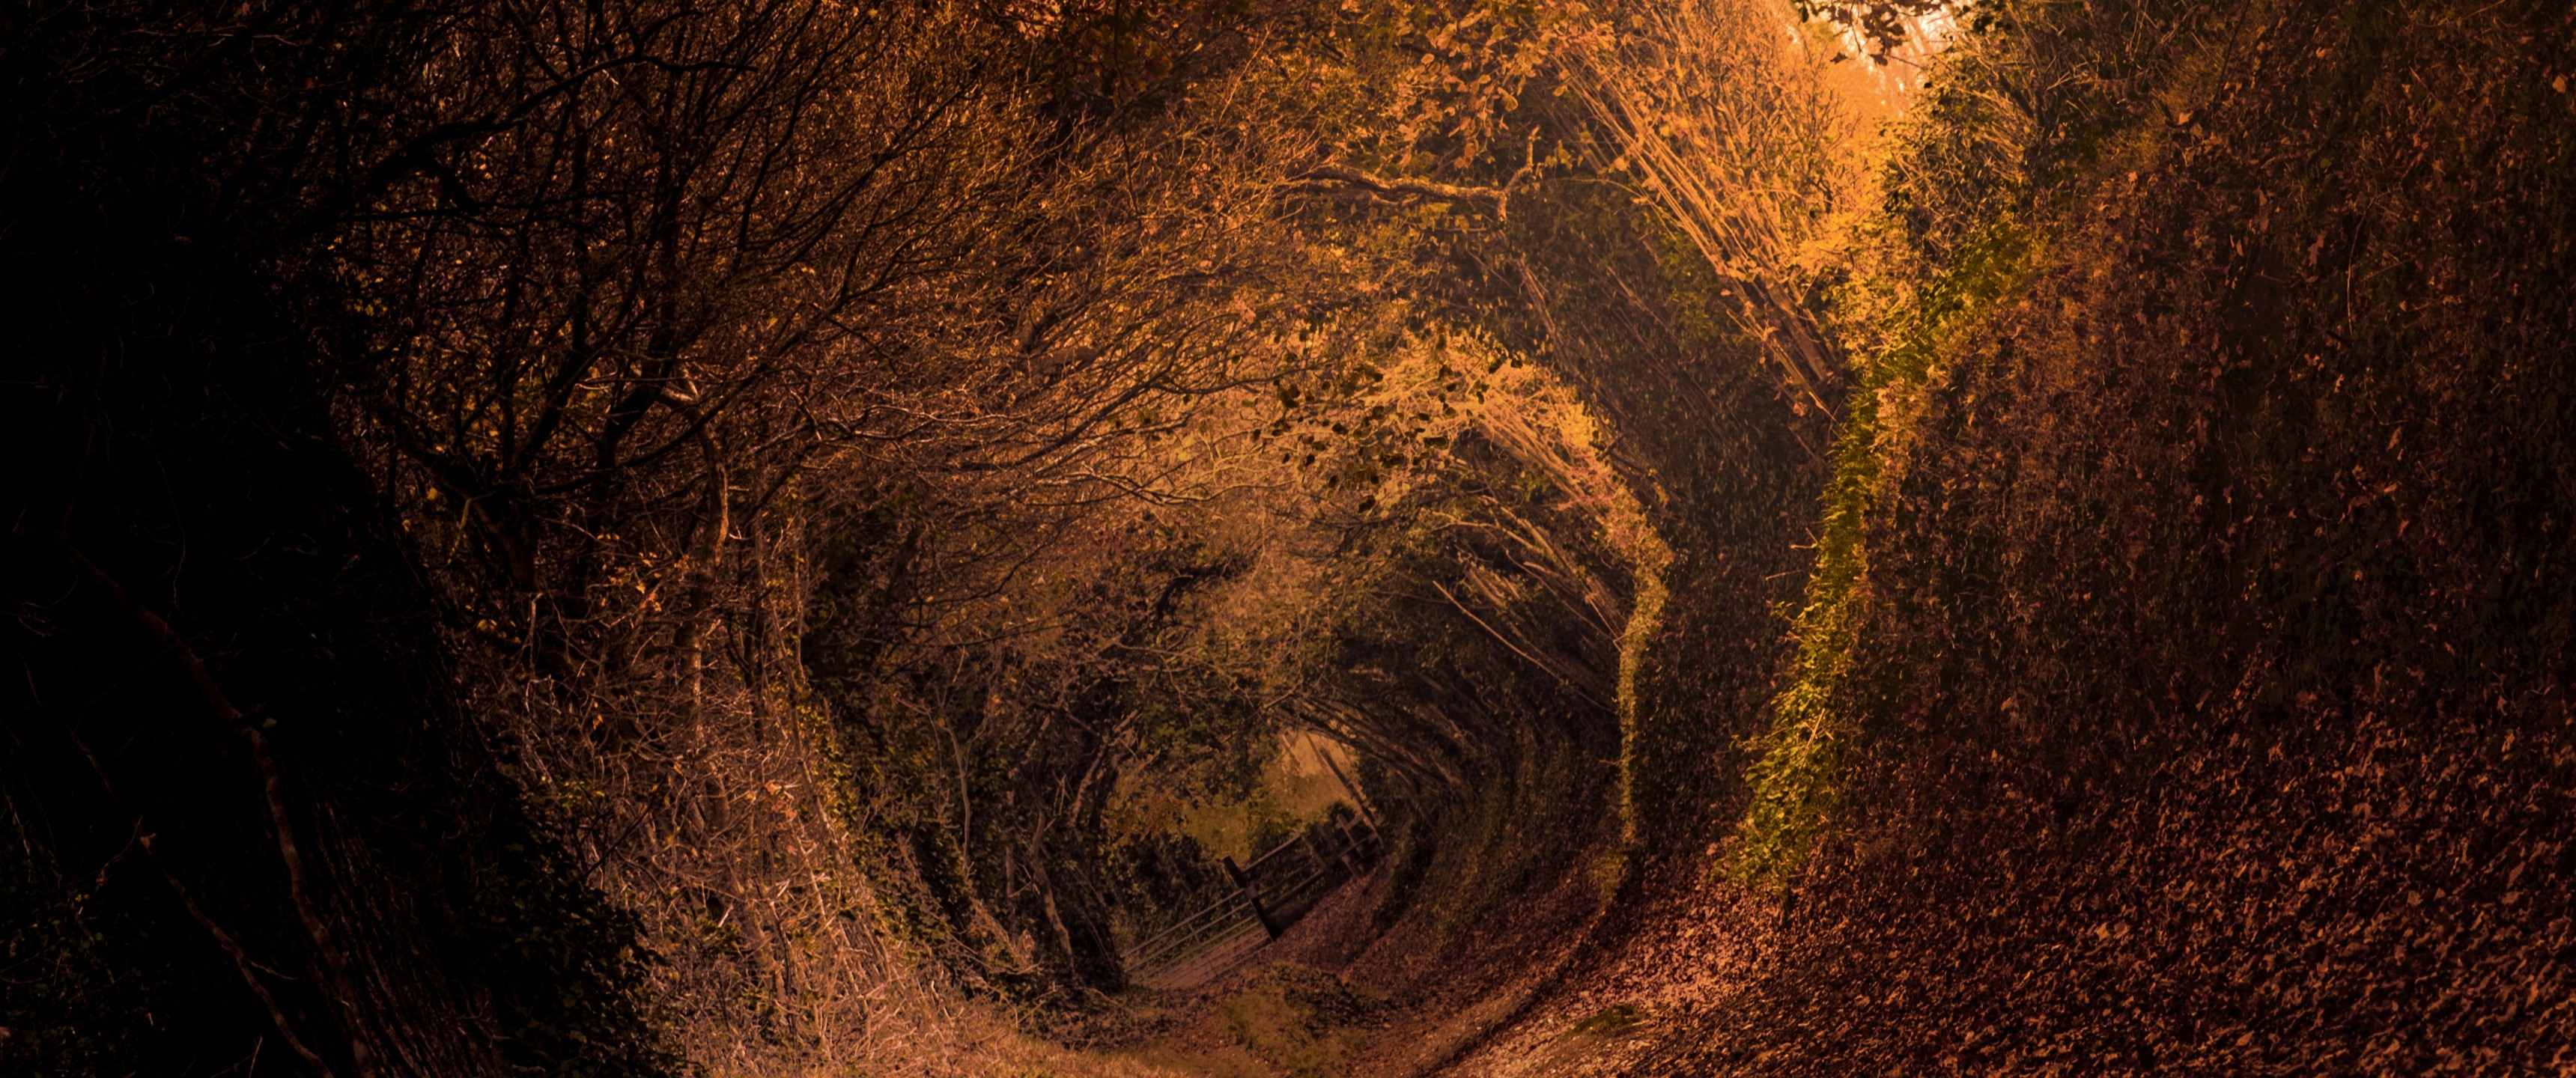 Download 3440x1440 Autumn Leaves, Tunnel, Trees Wallpaper